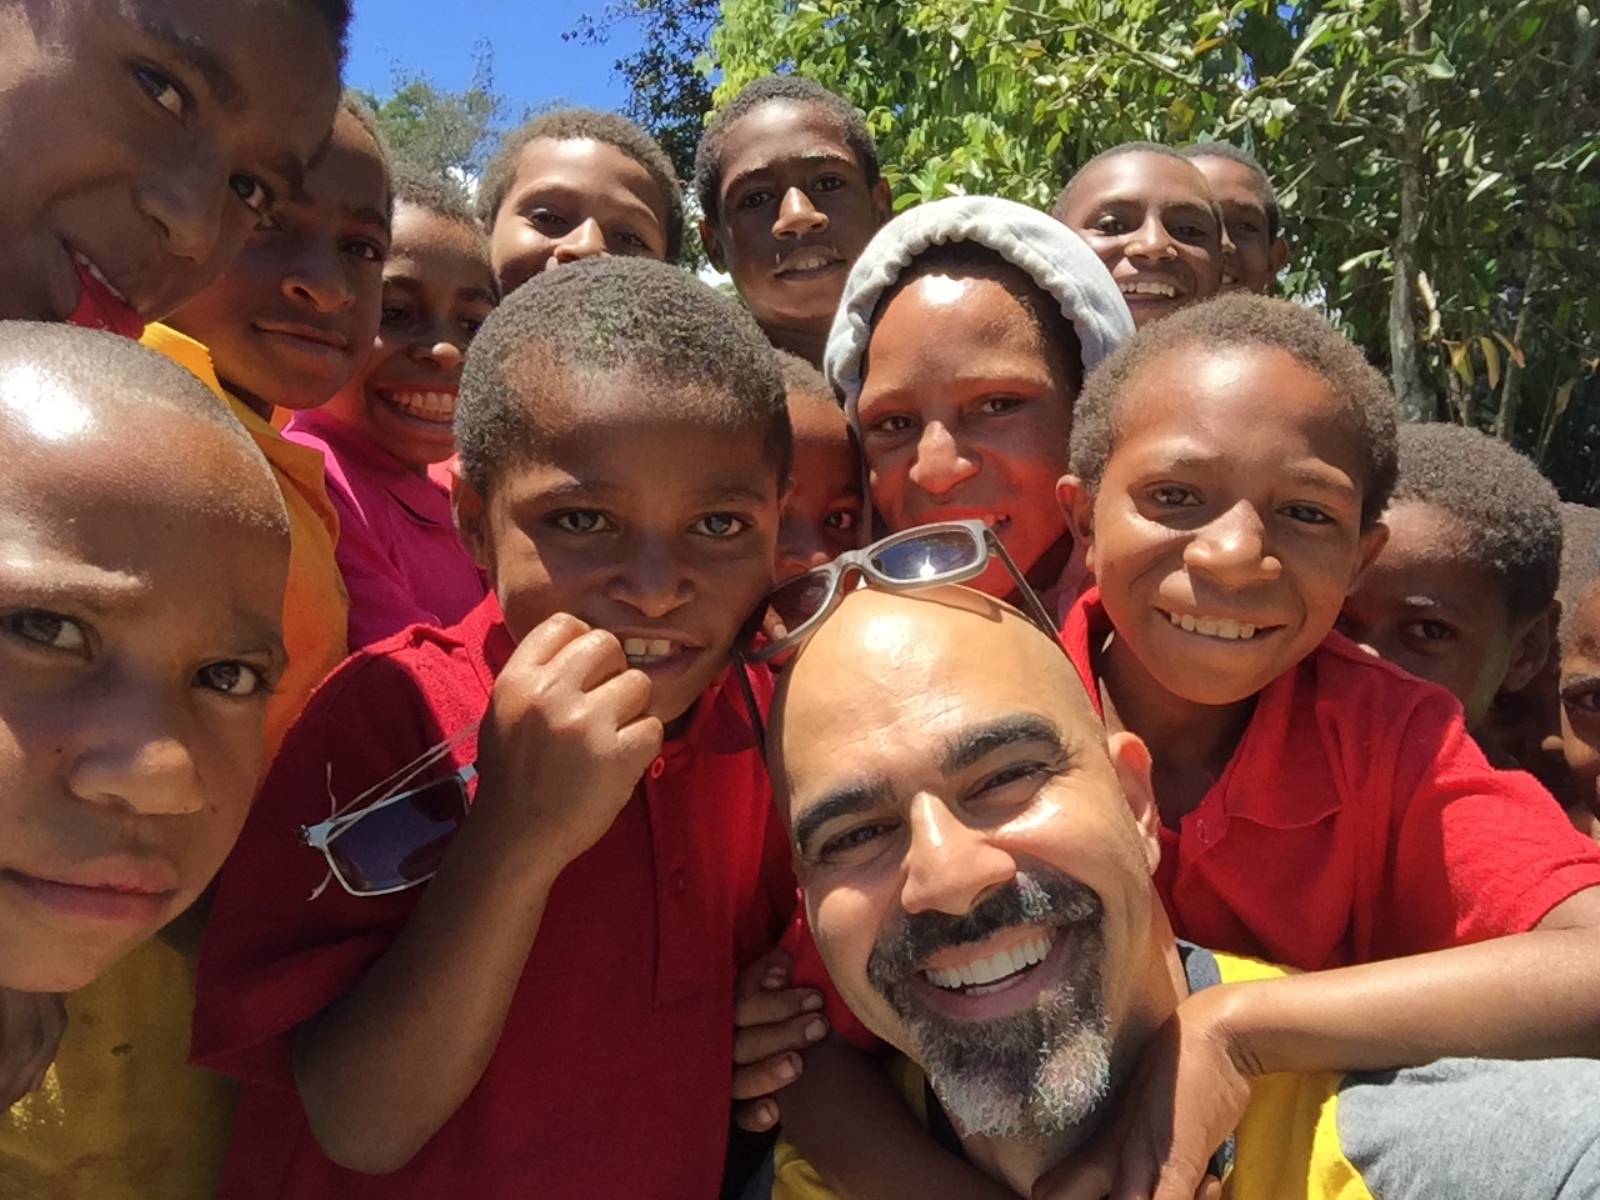 Golan Levi of MyHeritage with kids in the Hagen area of Papua New Guinea. Photo: courtesy